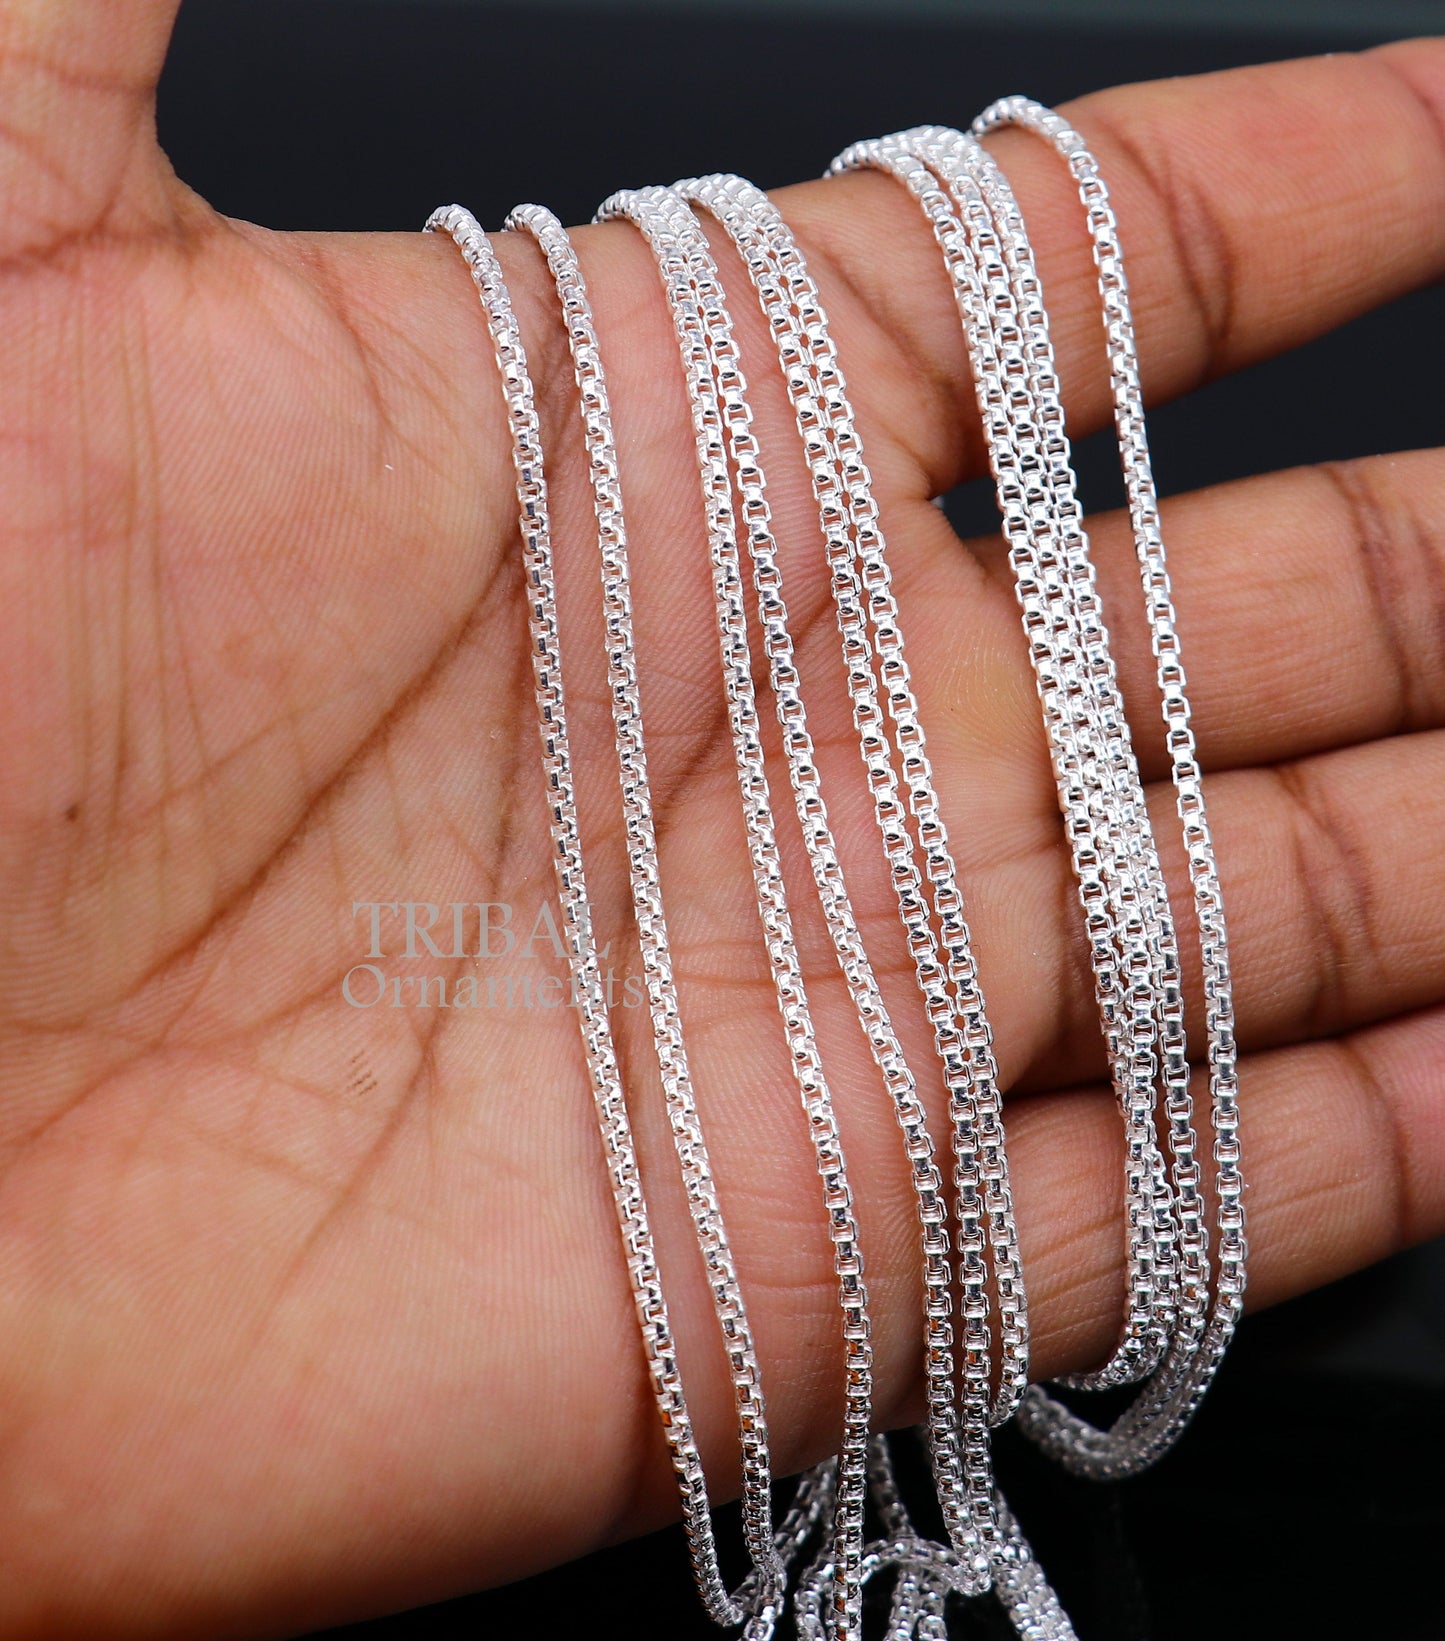 2mm 925 sterling silver handmade amazing stylish delicate solid Rolo high quality chains necklace, best gifting unisex necklace chain ch224 - TRIBAL ORNAMENTS